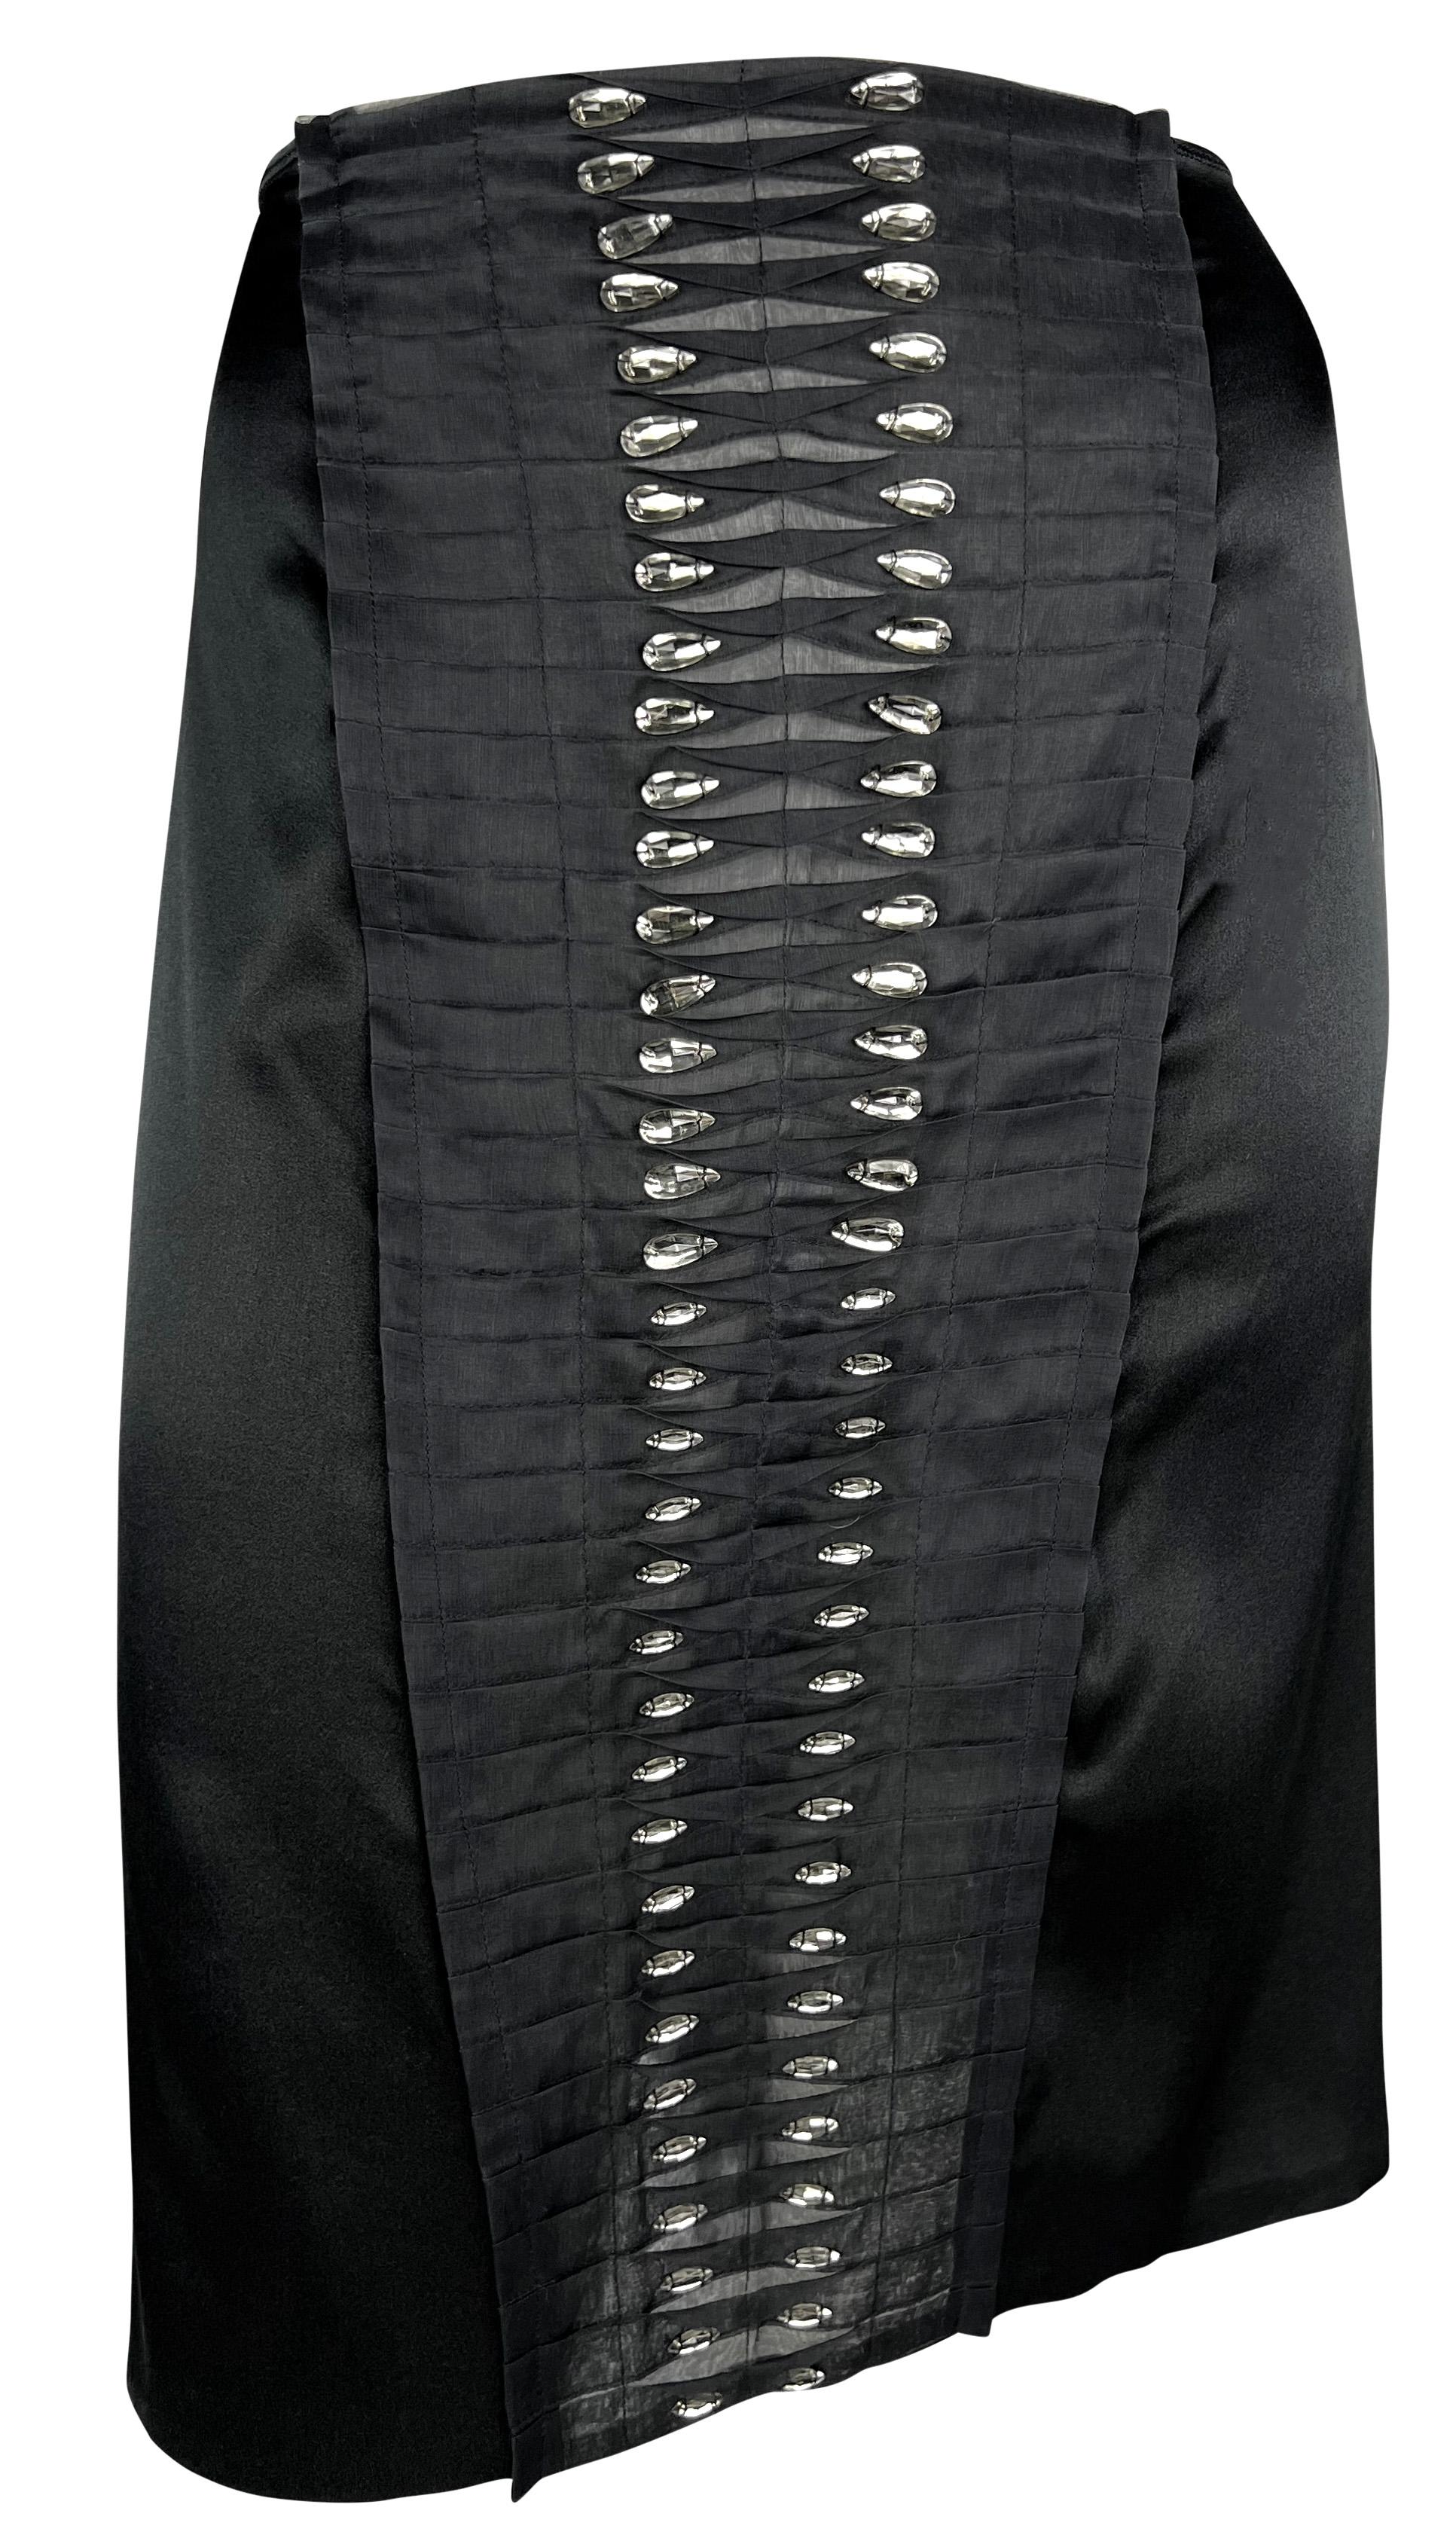 S/S 2004 Gucci by Tom Ford Runway Rhinestone Black Silk Pleated Bodycon Skirt For Sale 6